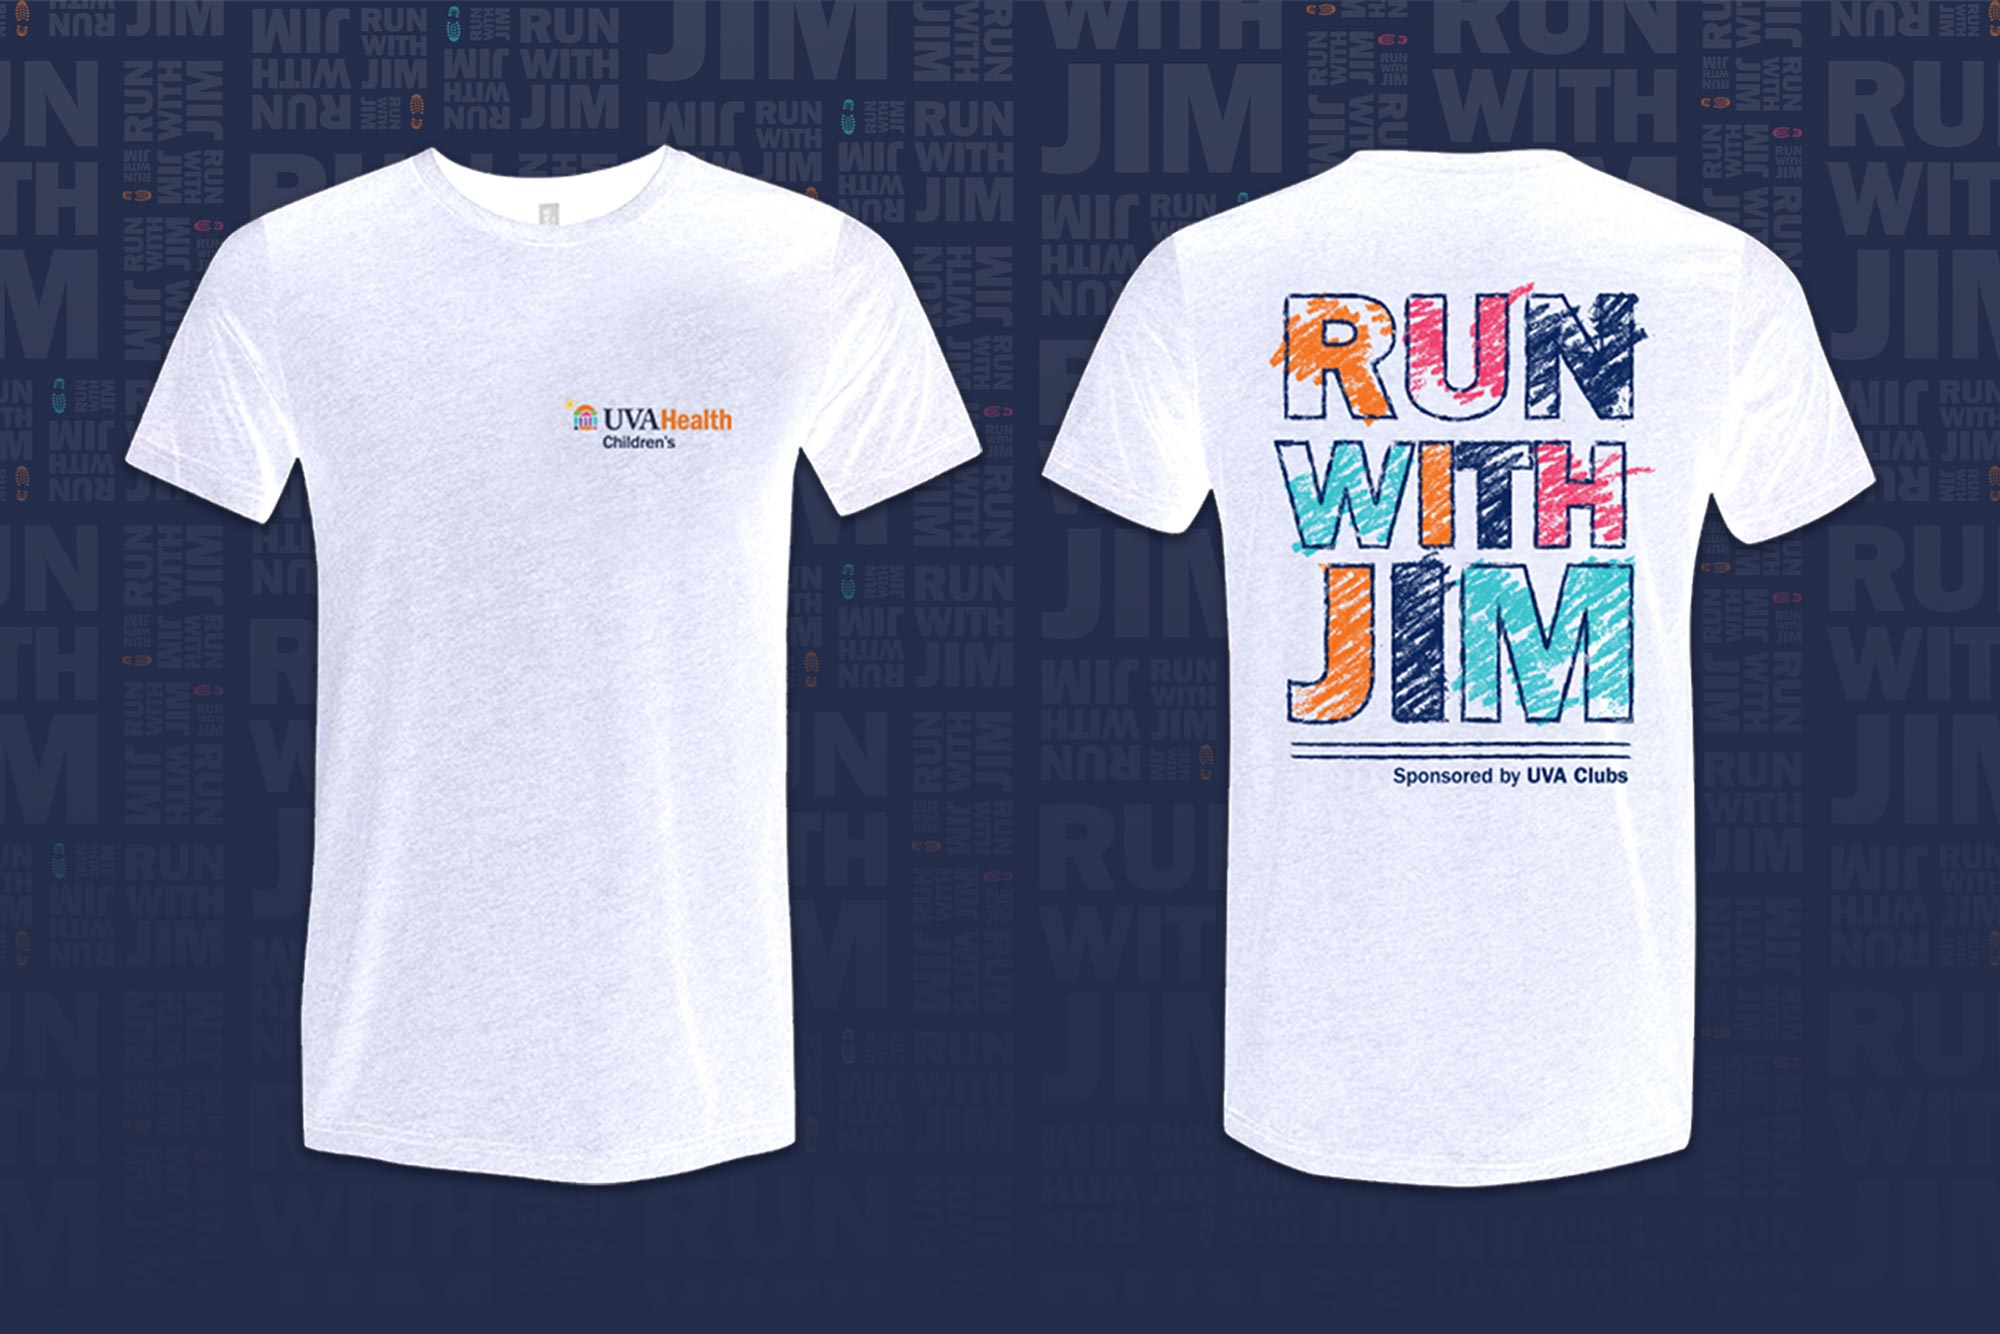 Picture of "Run With Jim" T-shirt